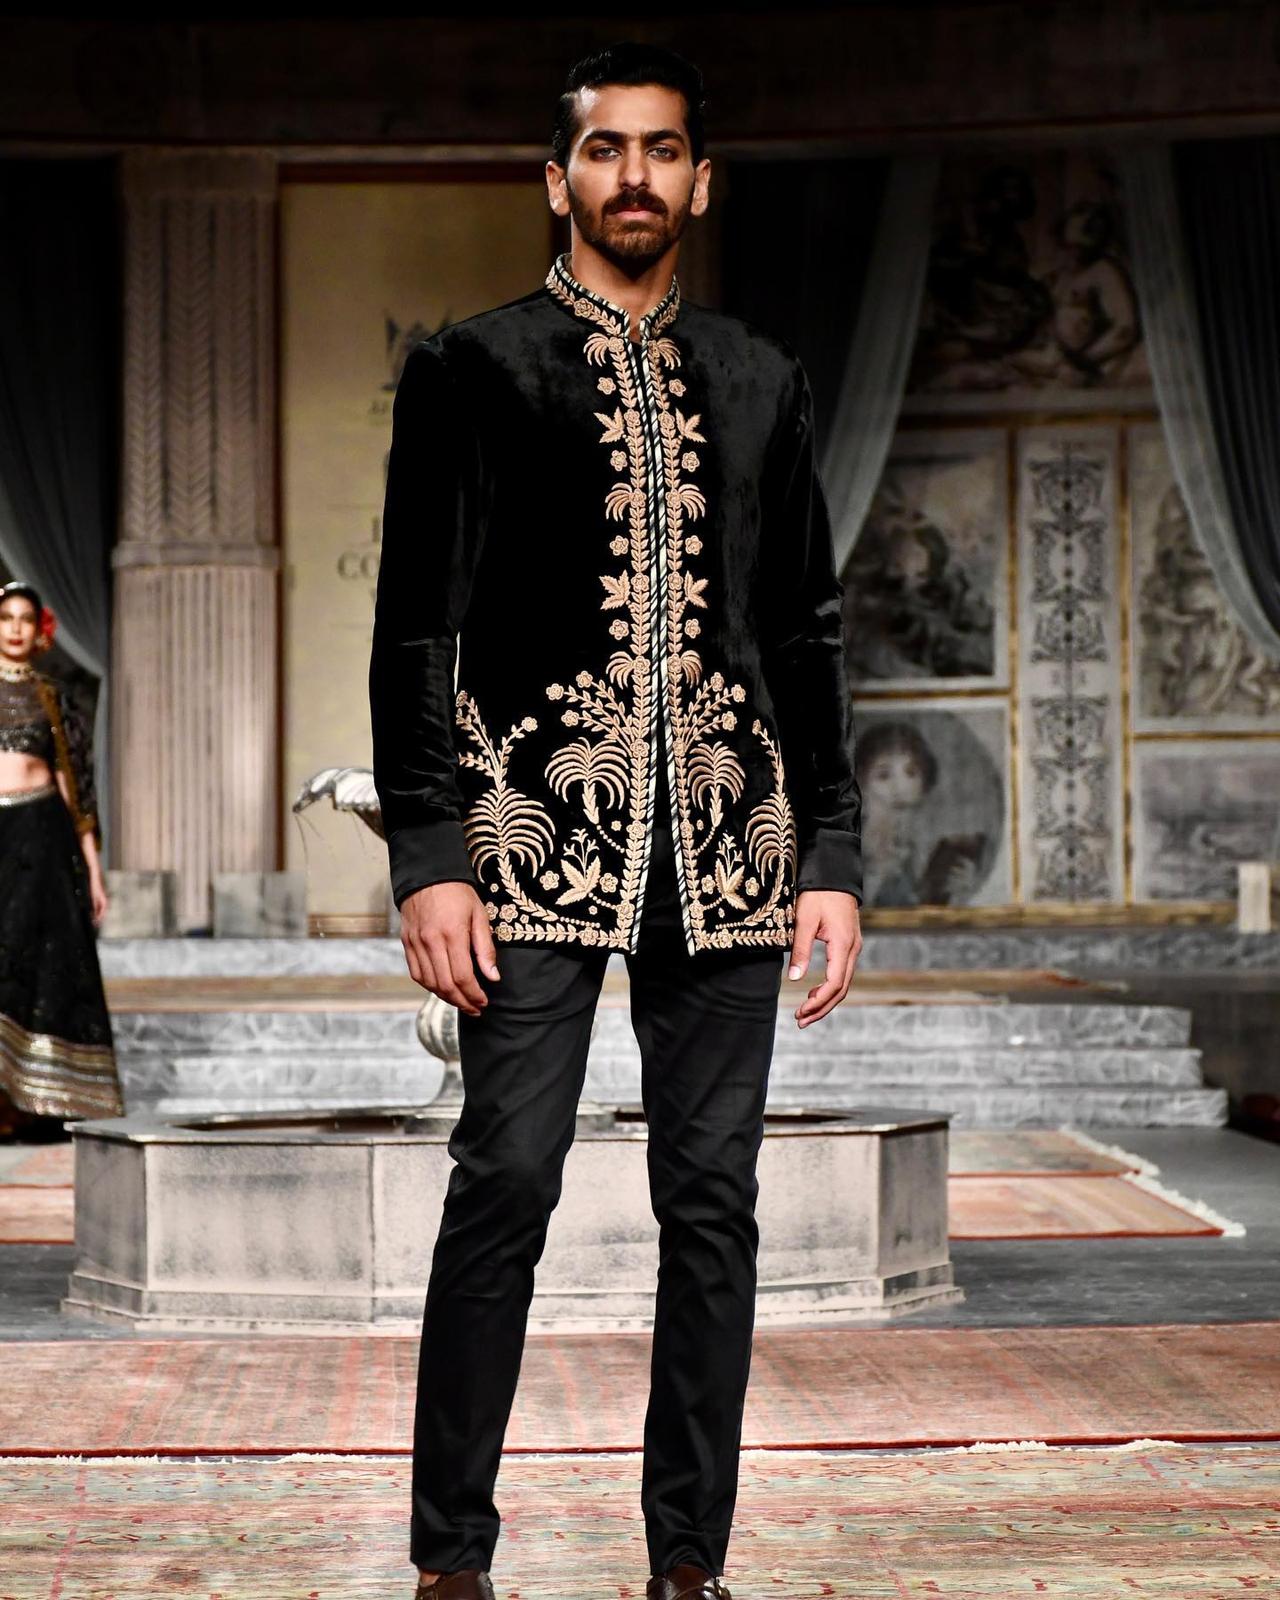 Indian wedding dresses for men | Reeshma - Style update and blog